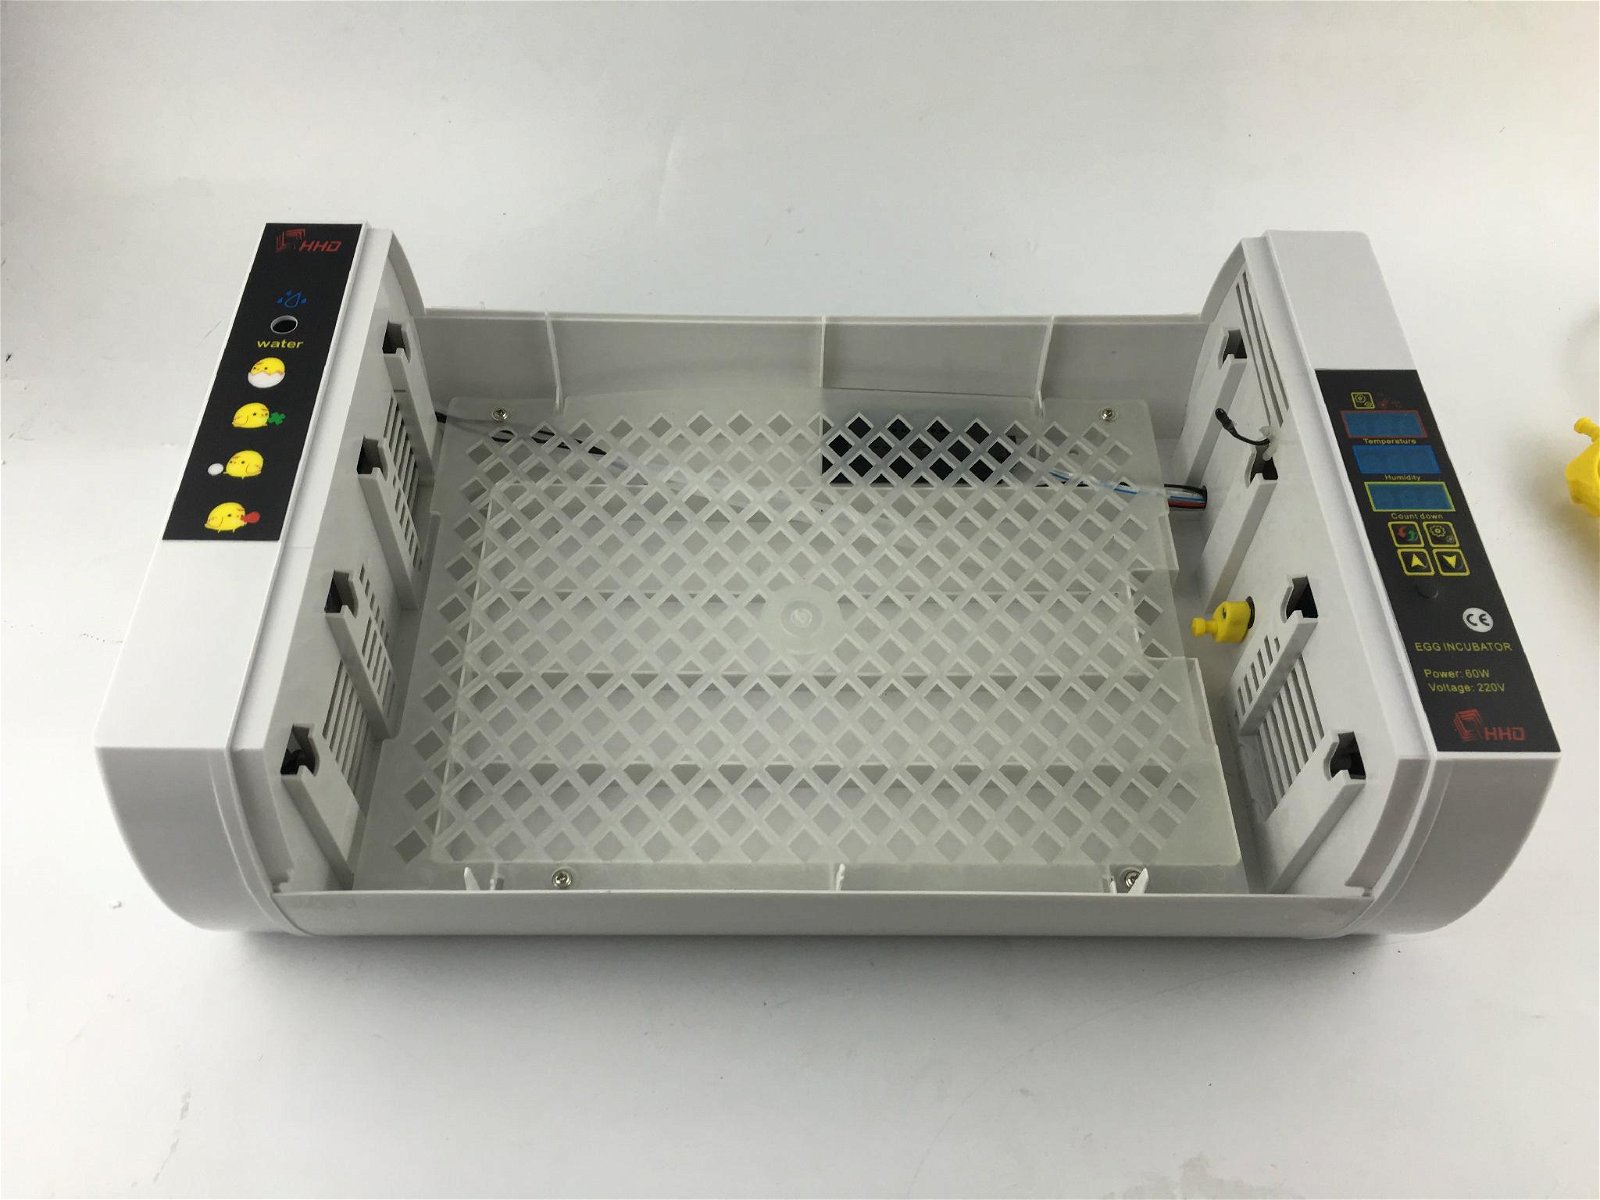 2017 Latest HHD automatic chicken egg incubator for sale YZ-24A 5